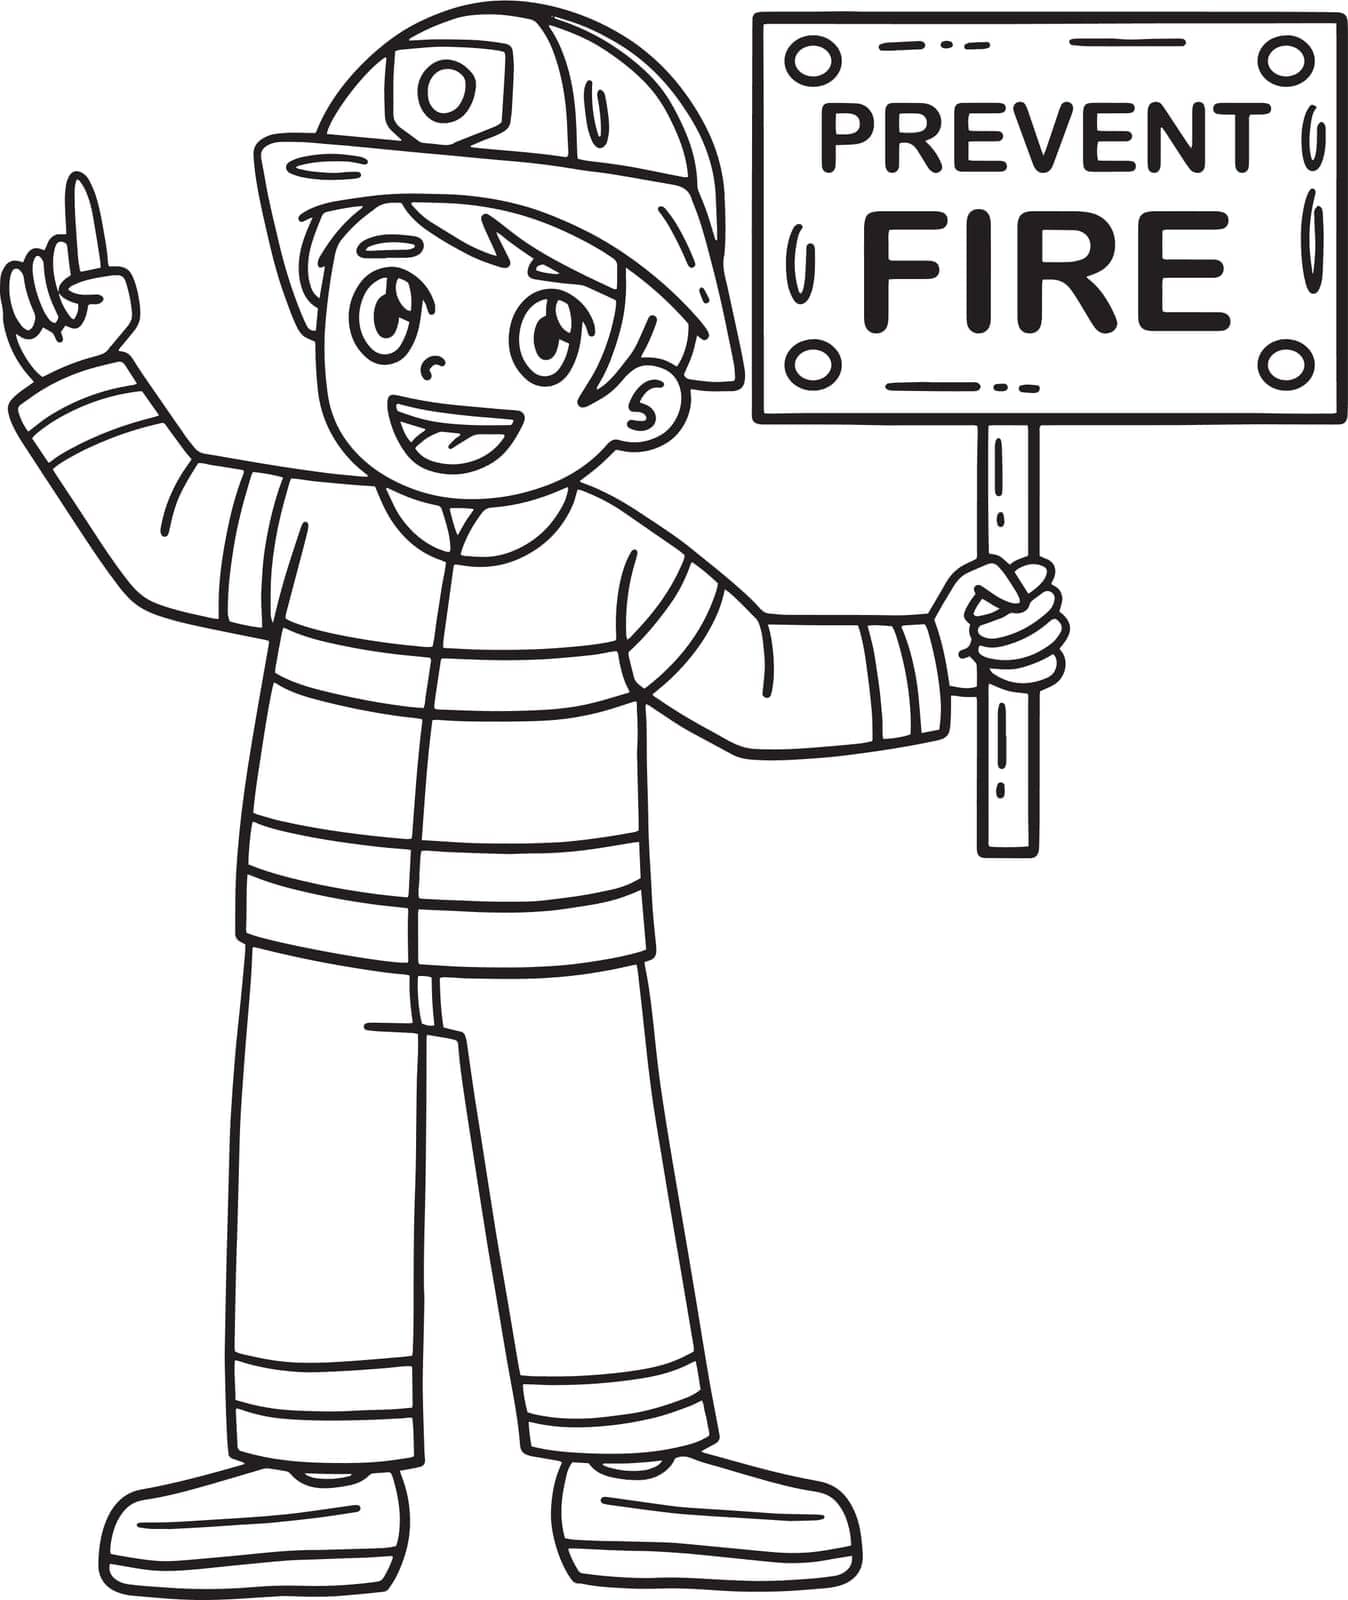 Firefighter Holding a Reminder Isolated Coloring by abbydesign